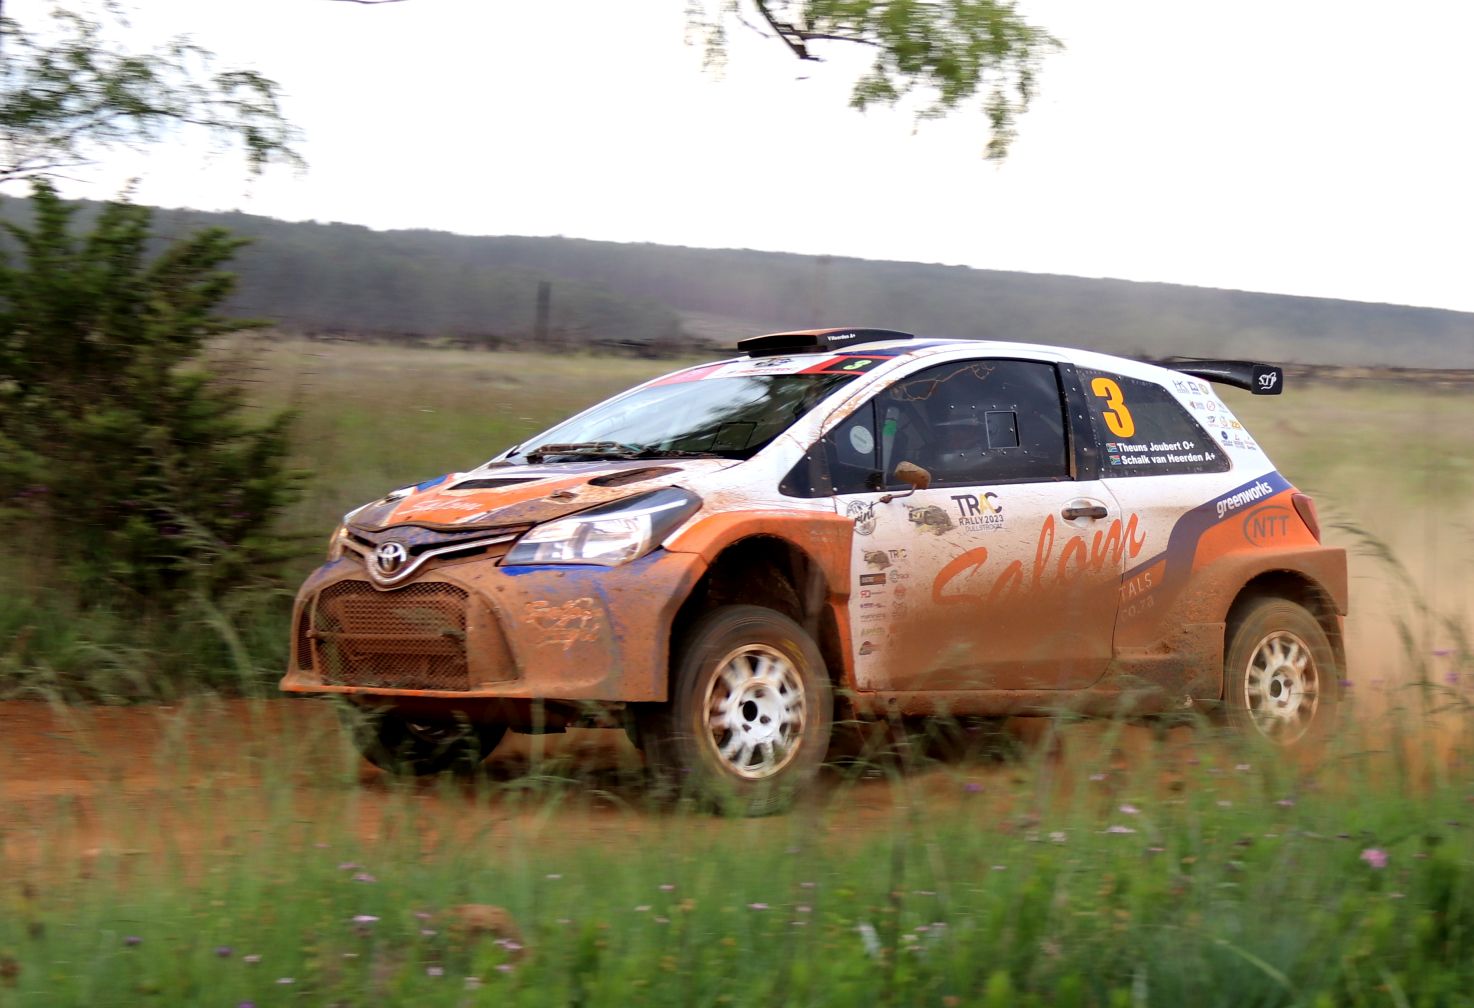 Toyota Yaris Rally car on a dirt road driving fat in a trail of dust